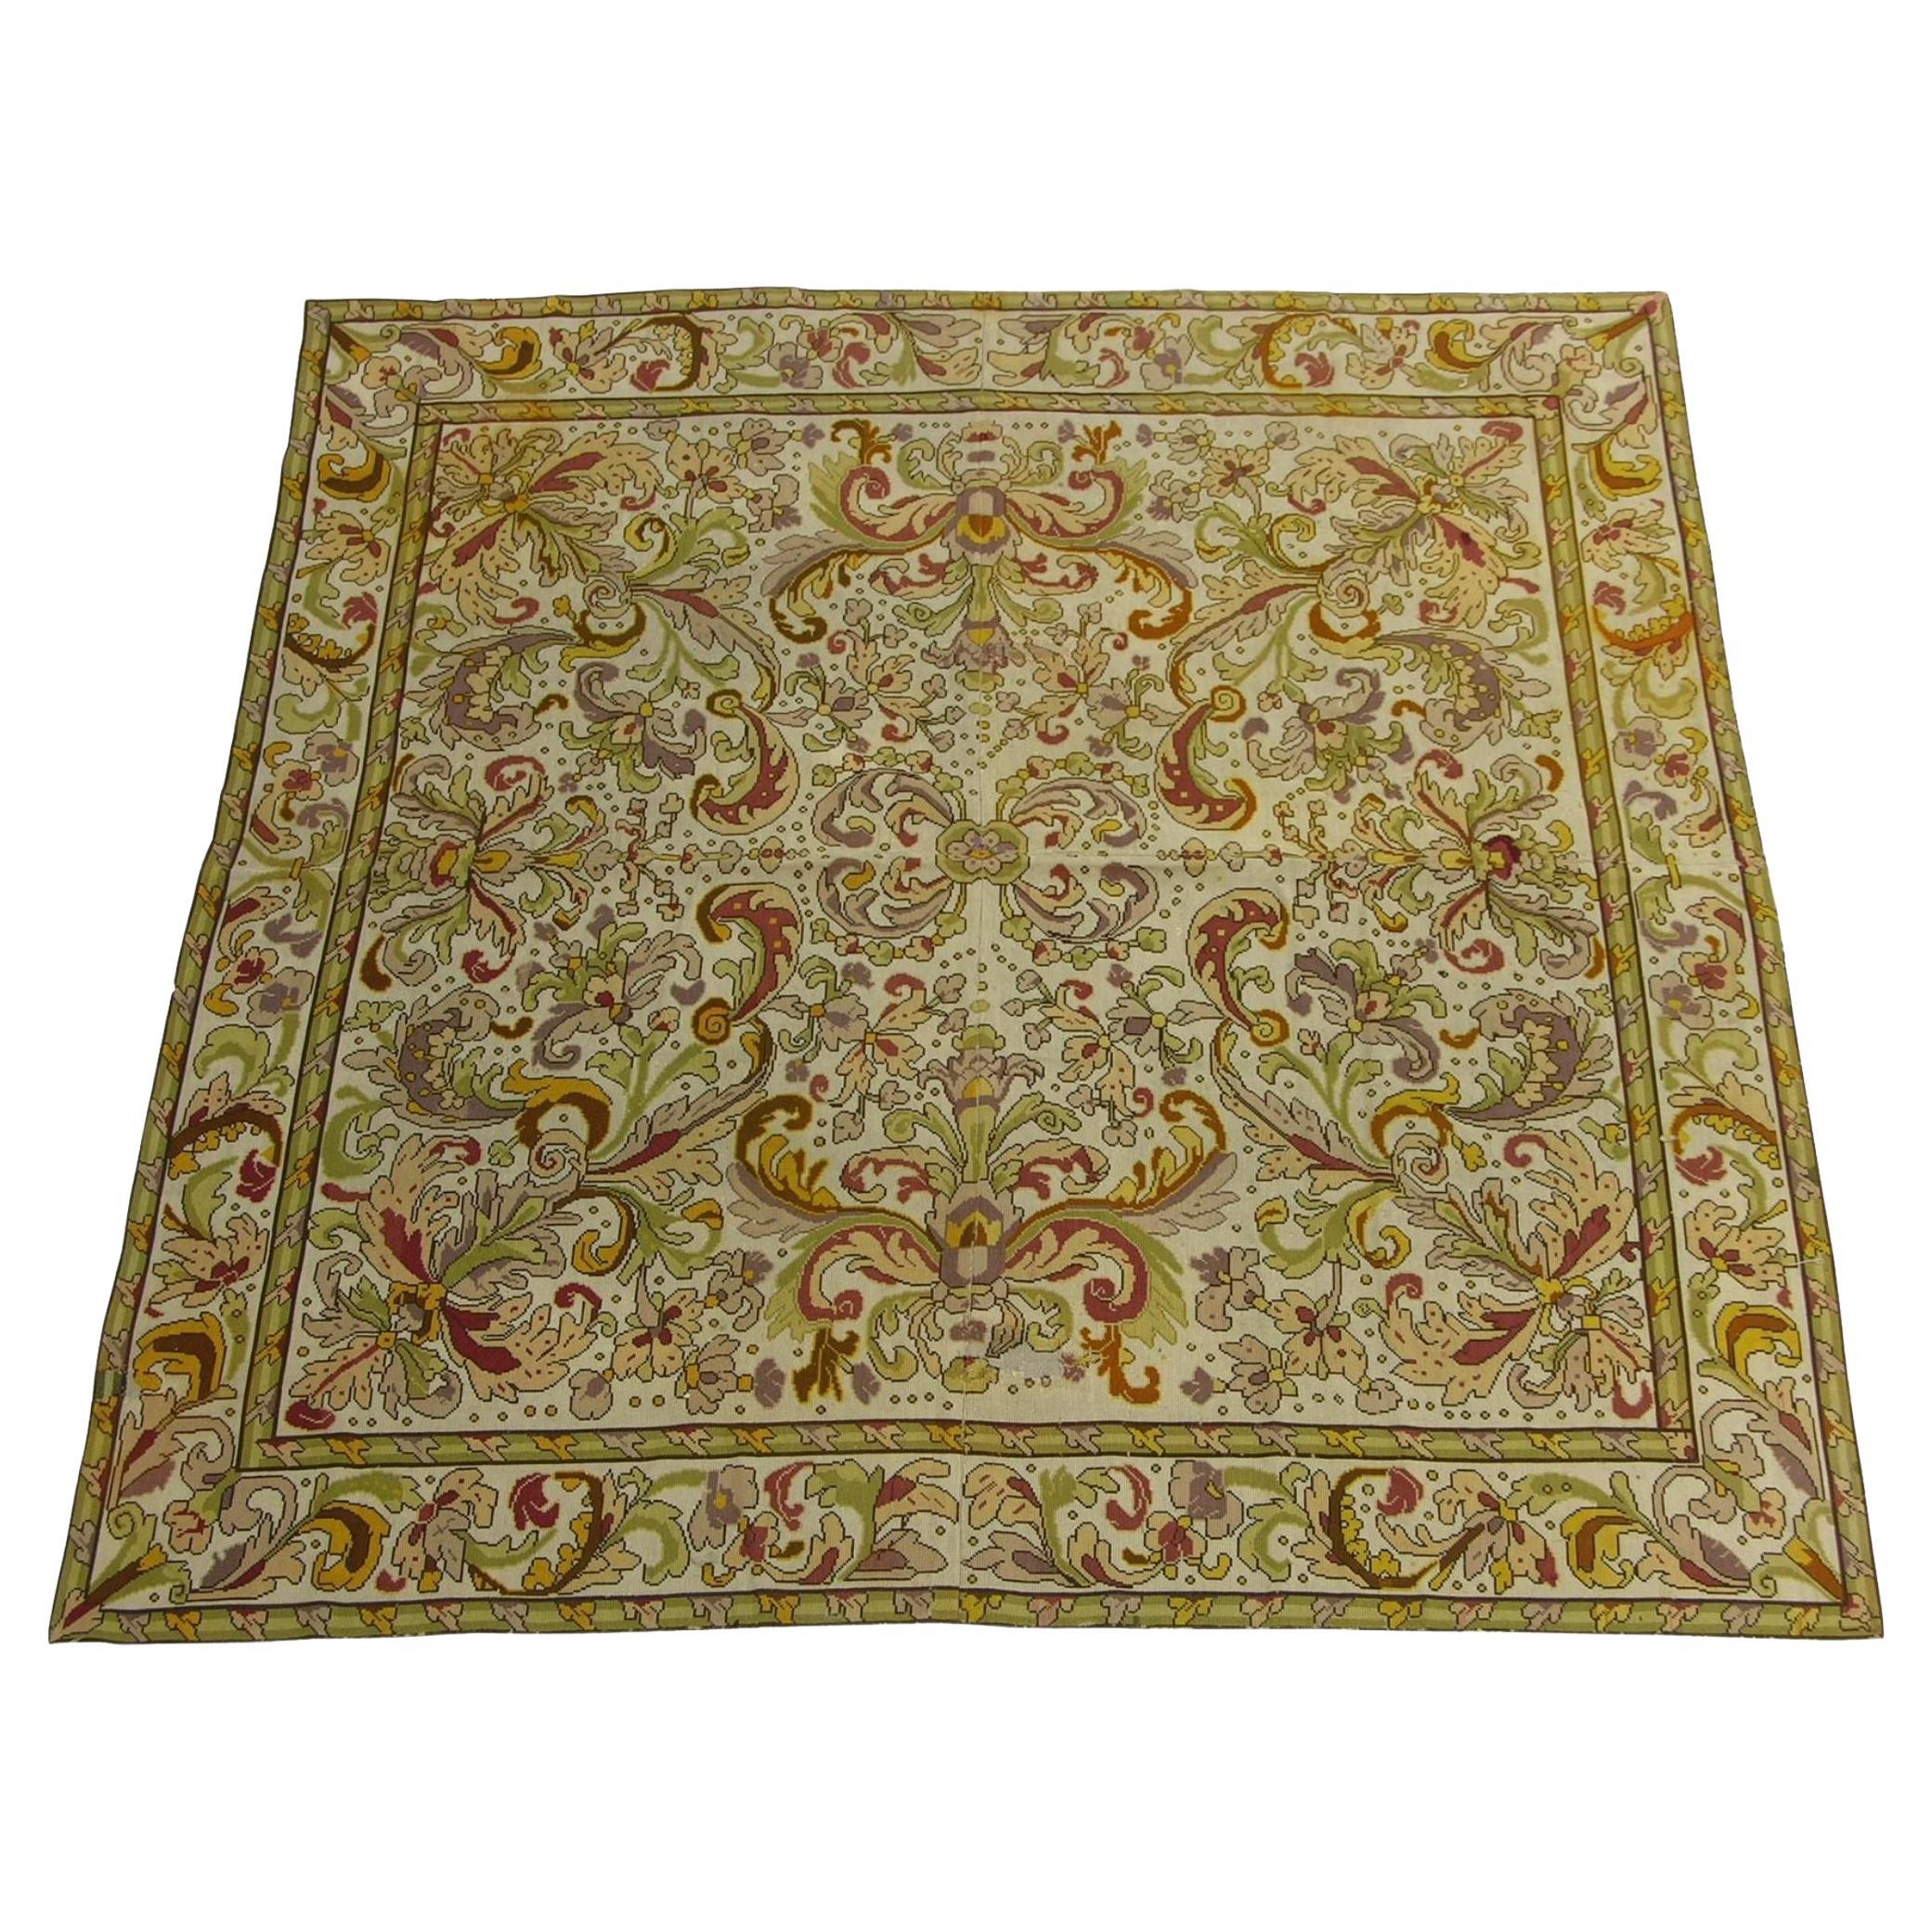 Early 20th Century Antique British Needlework Rug For Sale